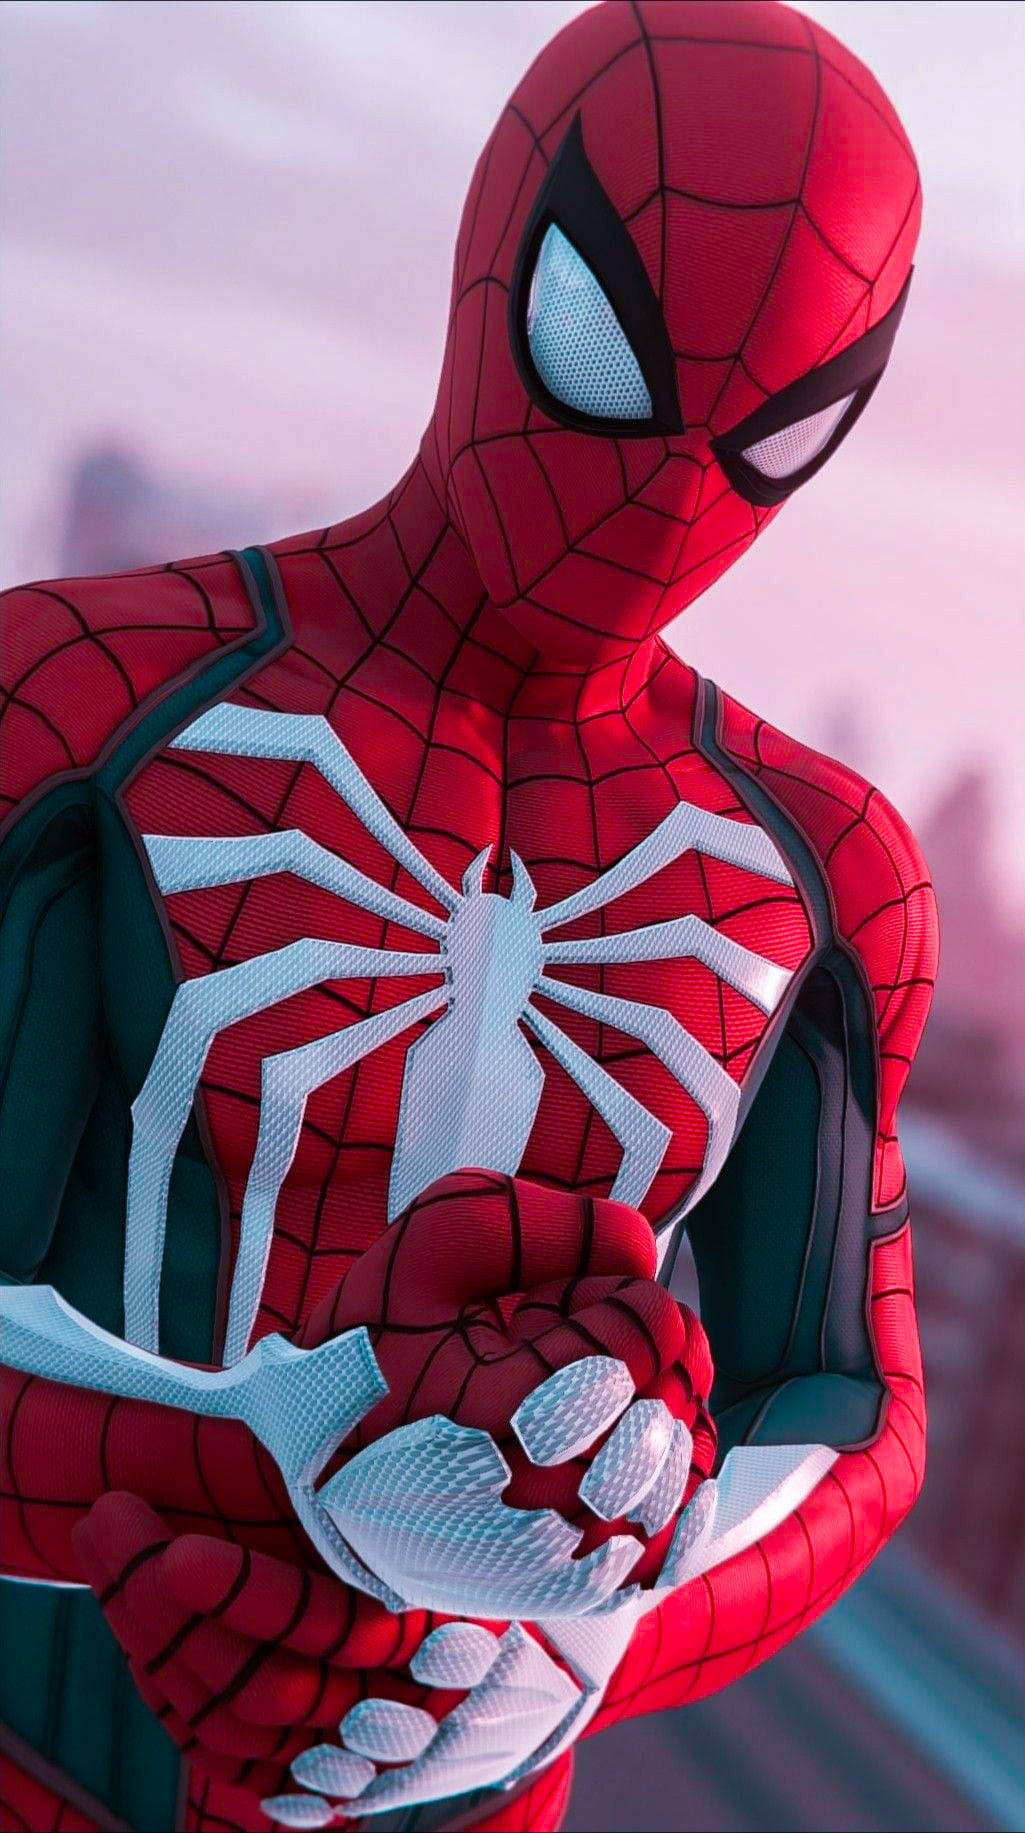 Download Marvel Iphone Spider Man Video Game Visual Wallpaper | Wallpapers .com